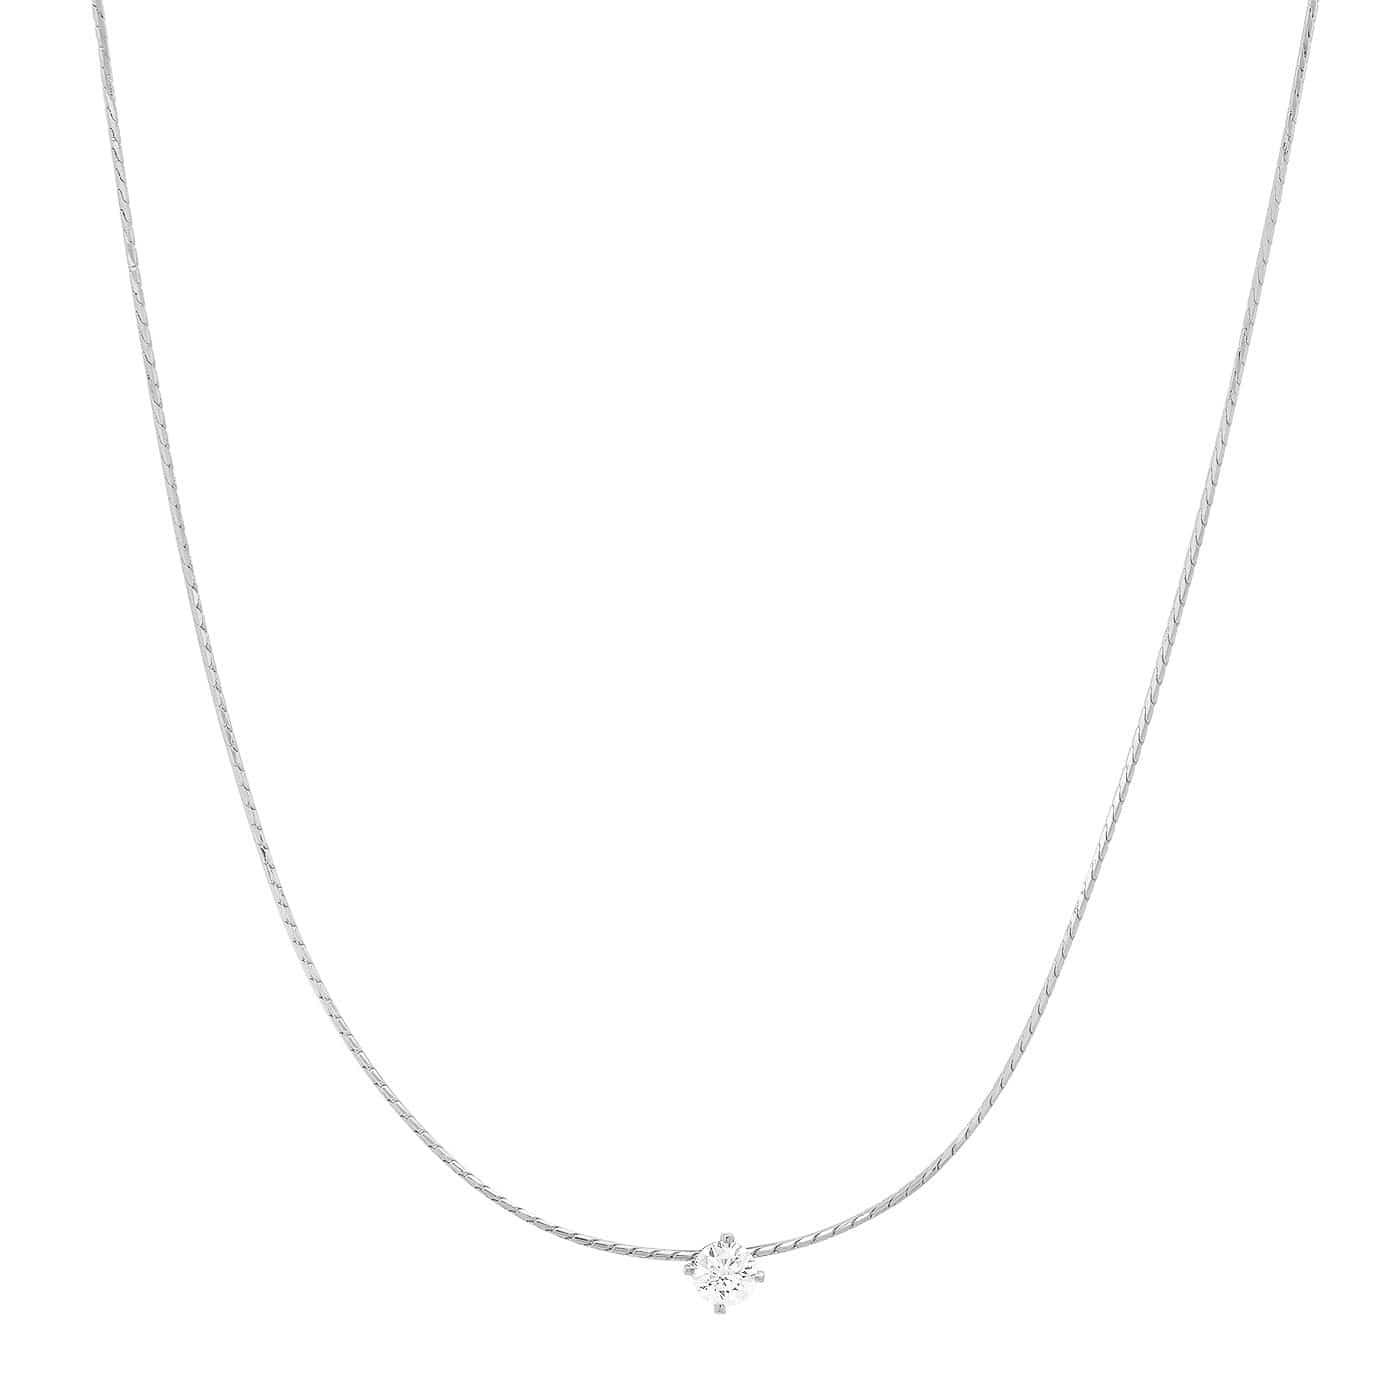 TAI JEWELRY Necklace Silver Snake Chain With Simple Cz Center Stone